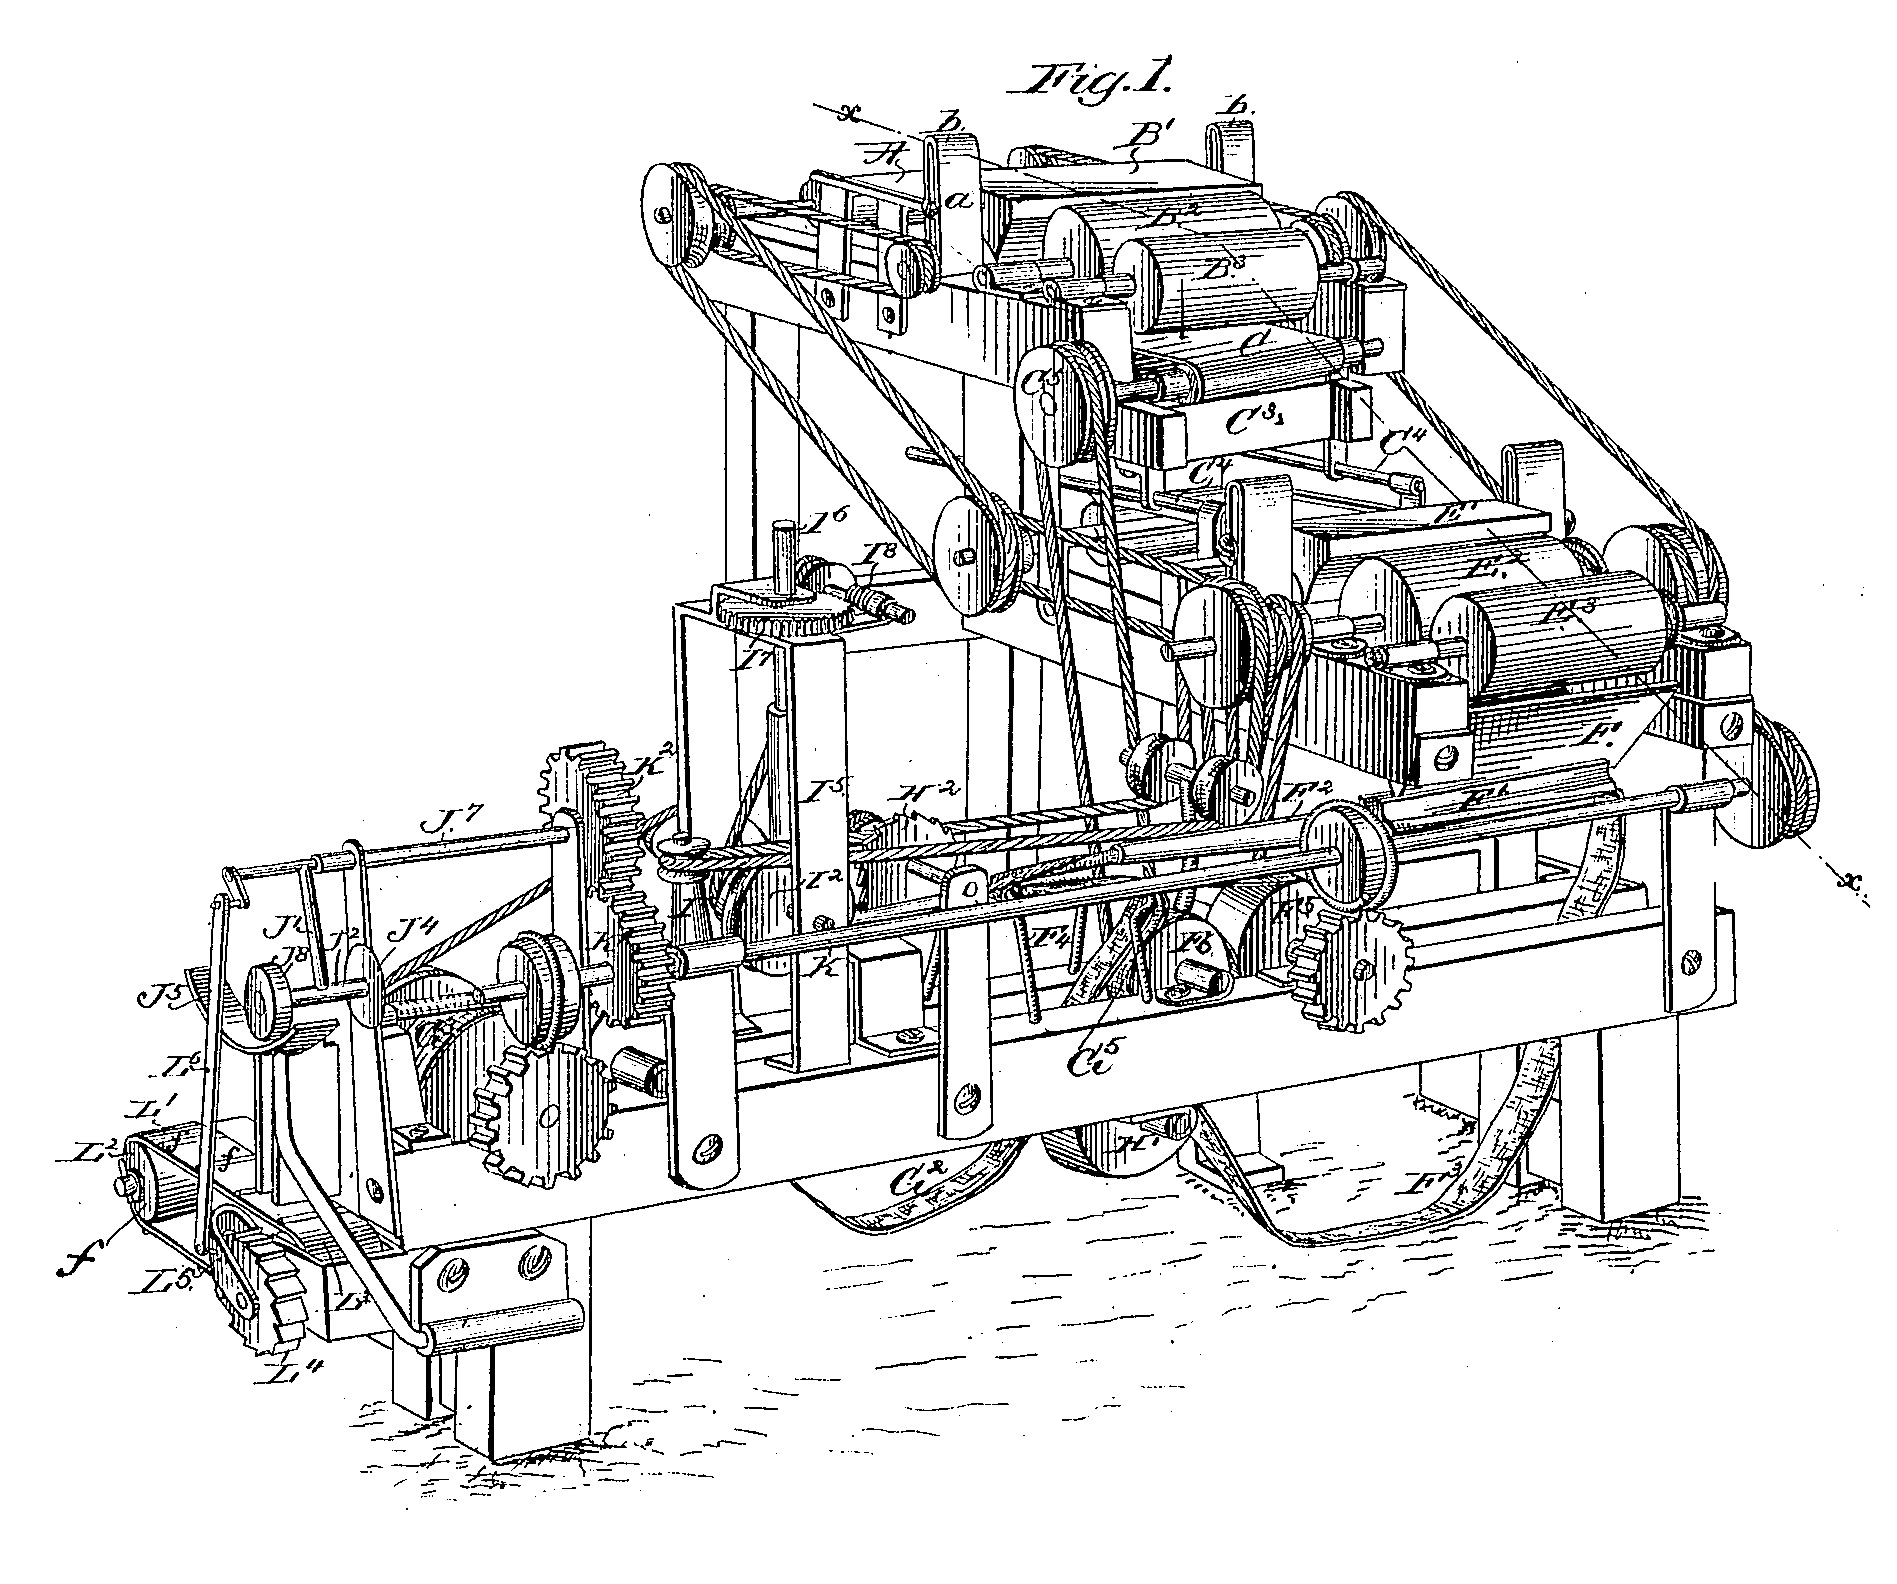 Drawing of the Bonsack Machine from patent application.